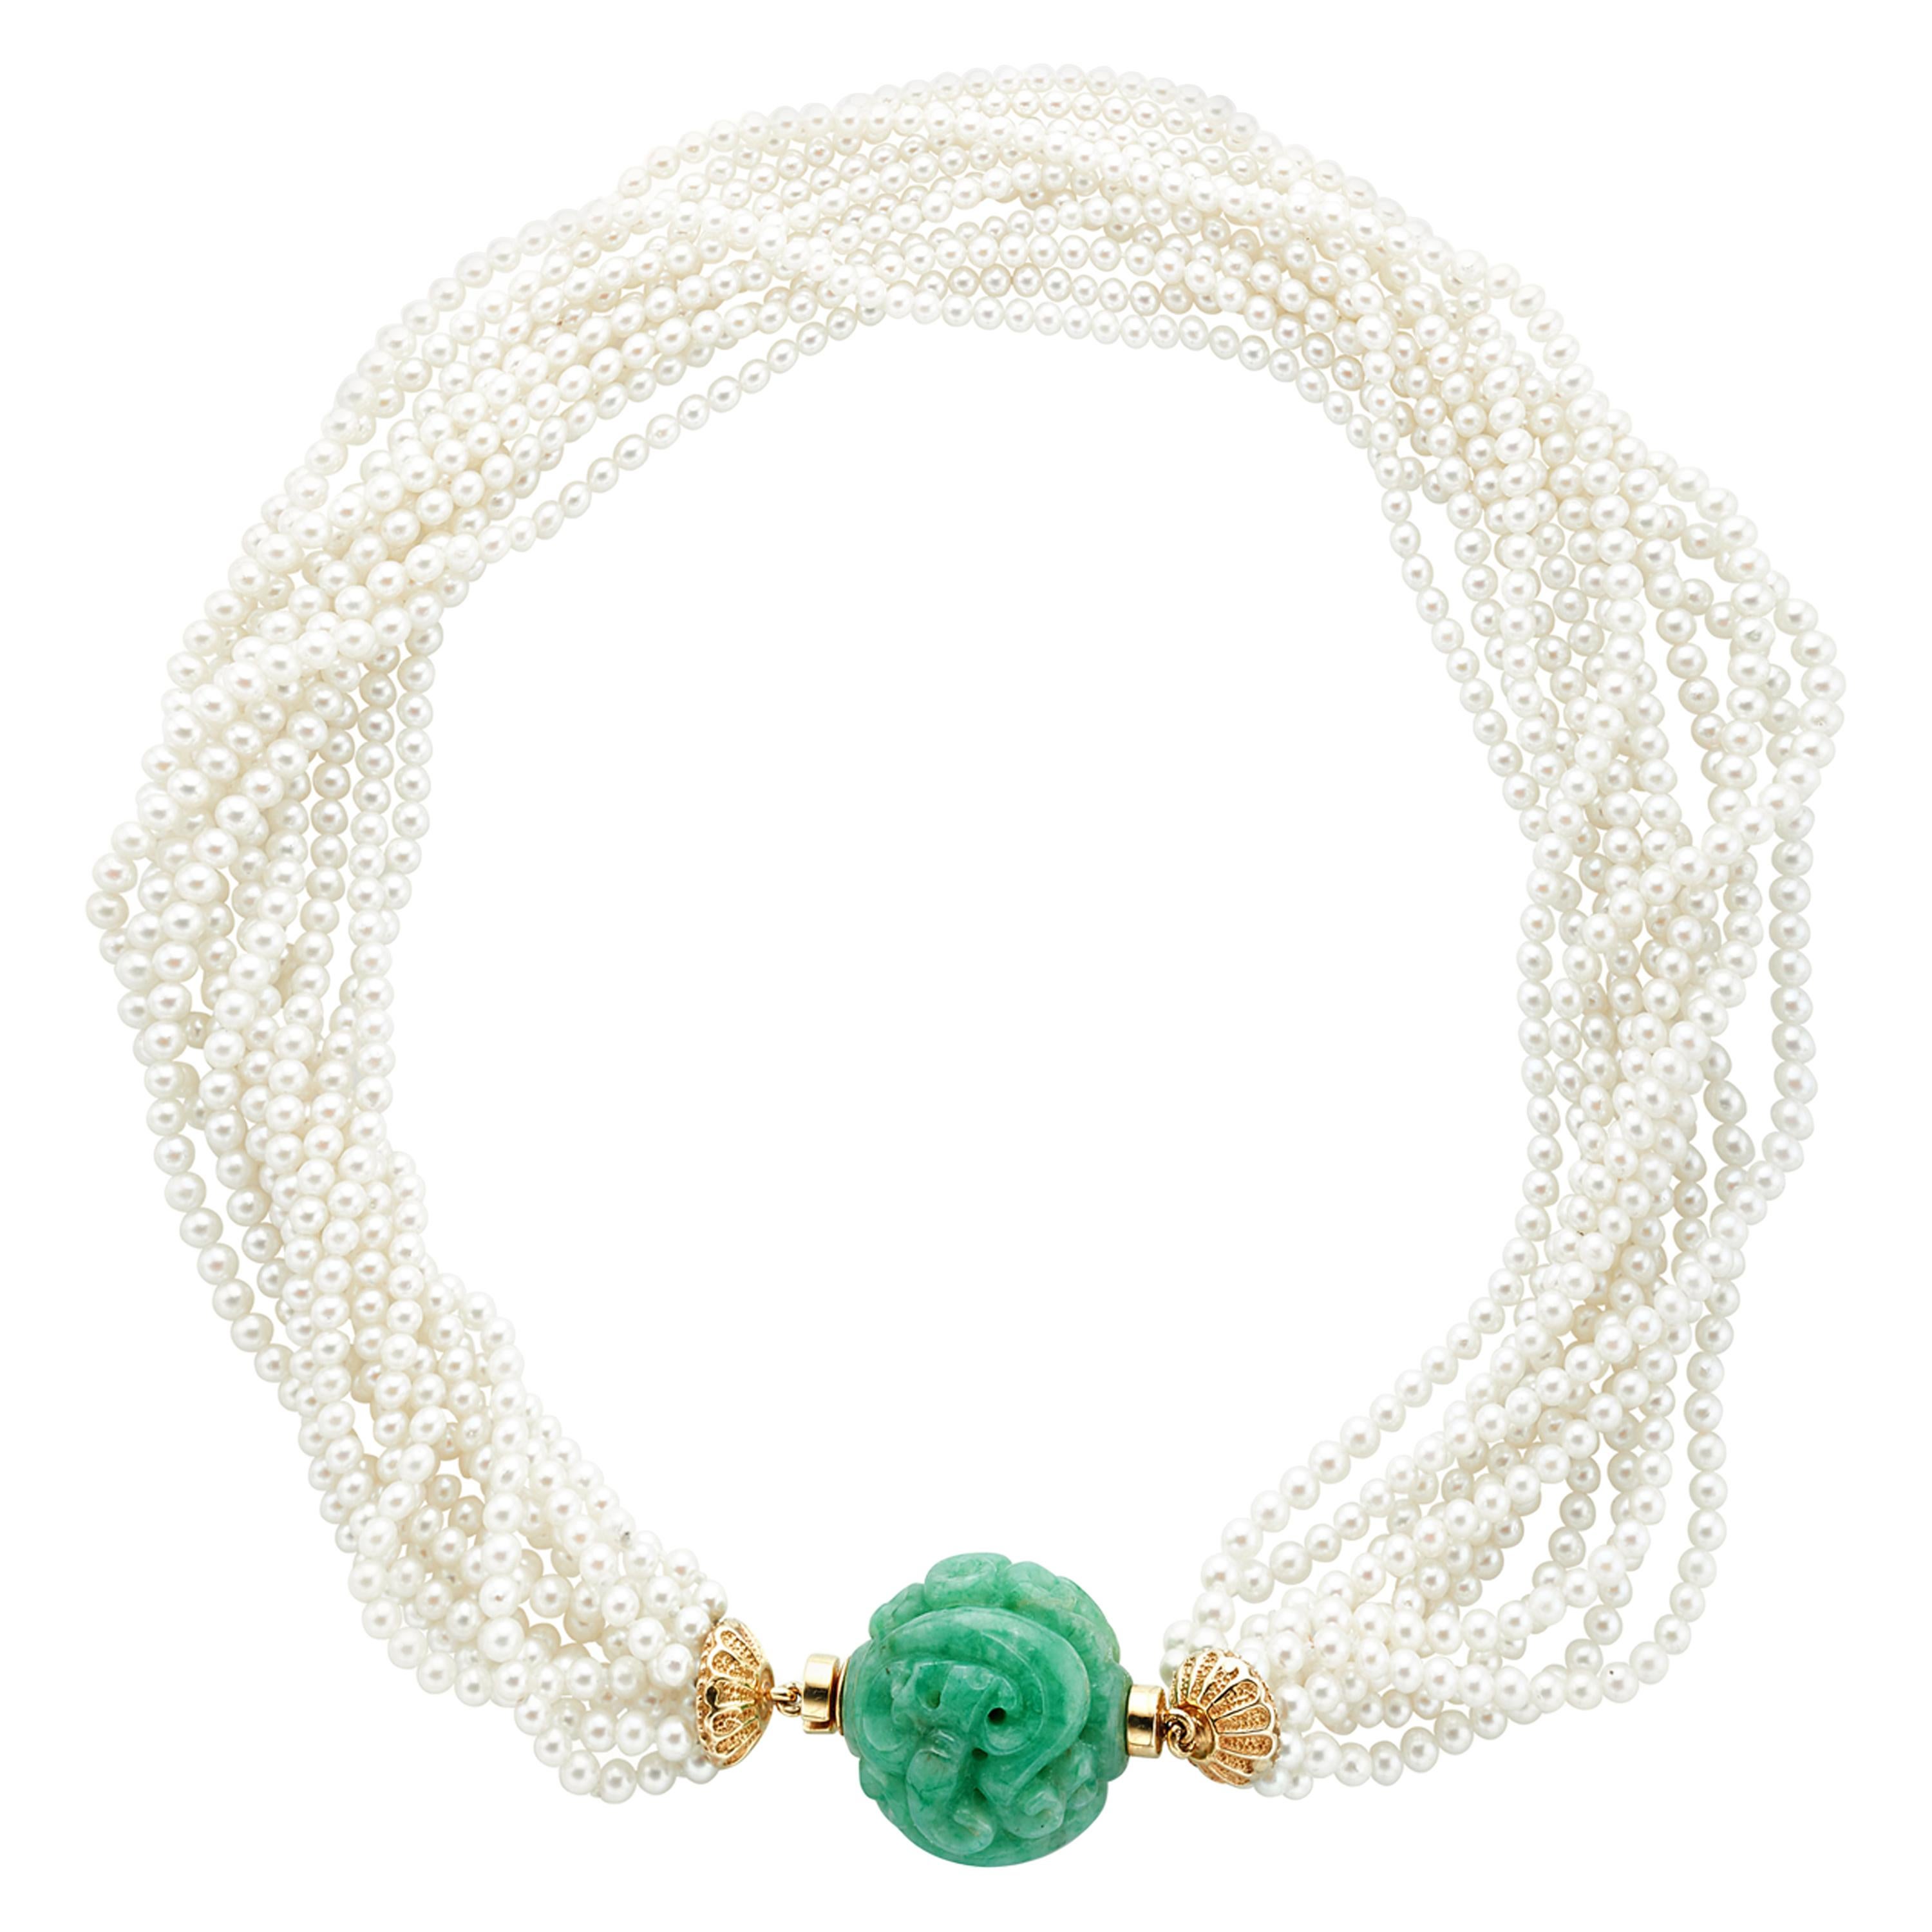 11-Strand Akoya Pearl and Carved Jadeite 18 Karat Yellow Gold Necklace